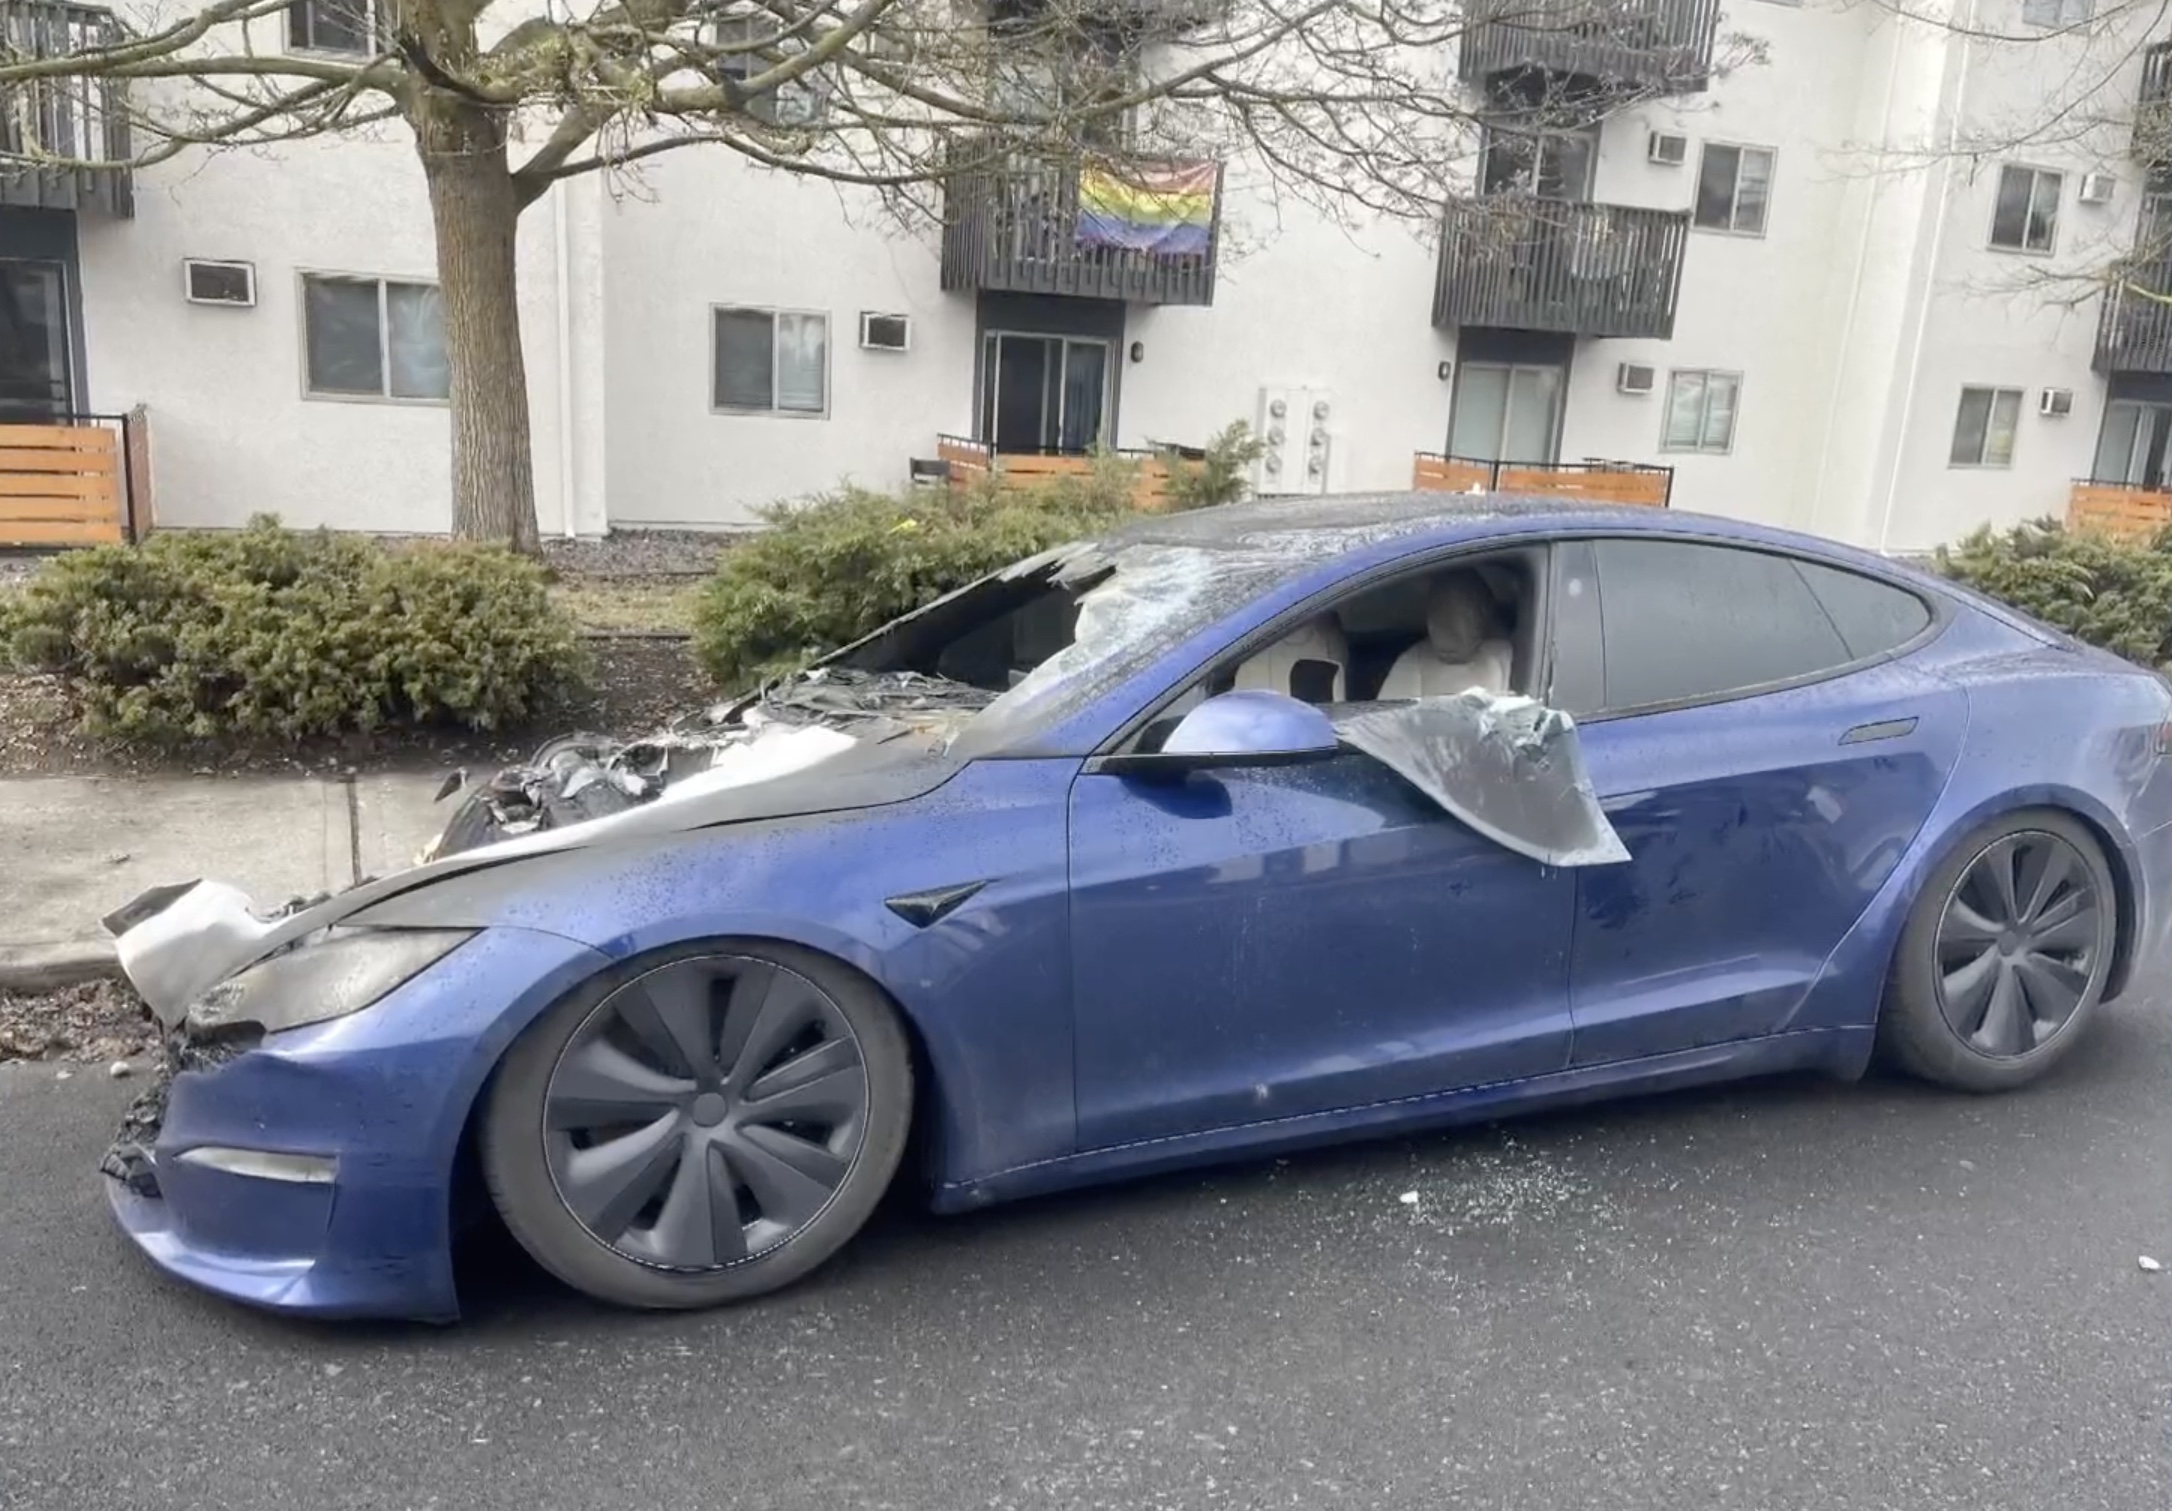 Shocking Tesla Sentry Mode video shows man allegedly setting Model S on fire